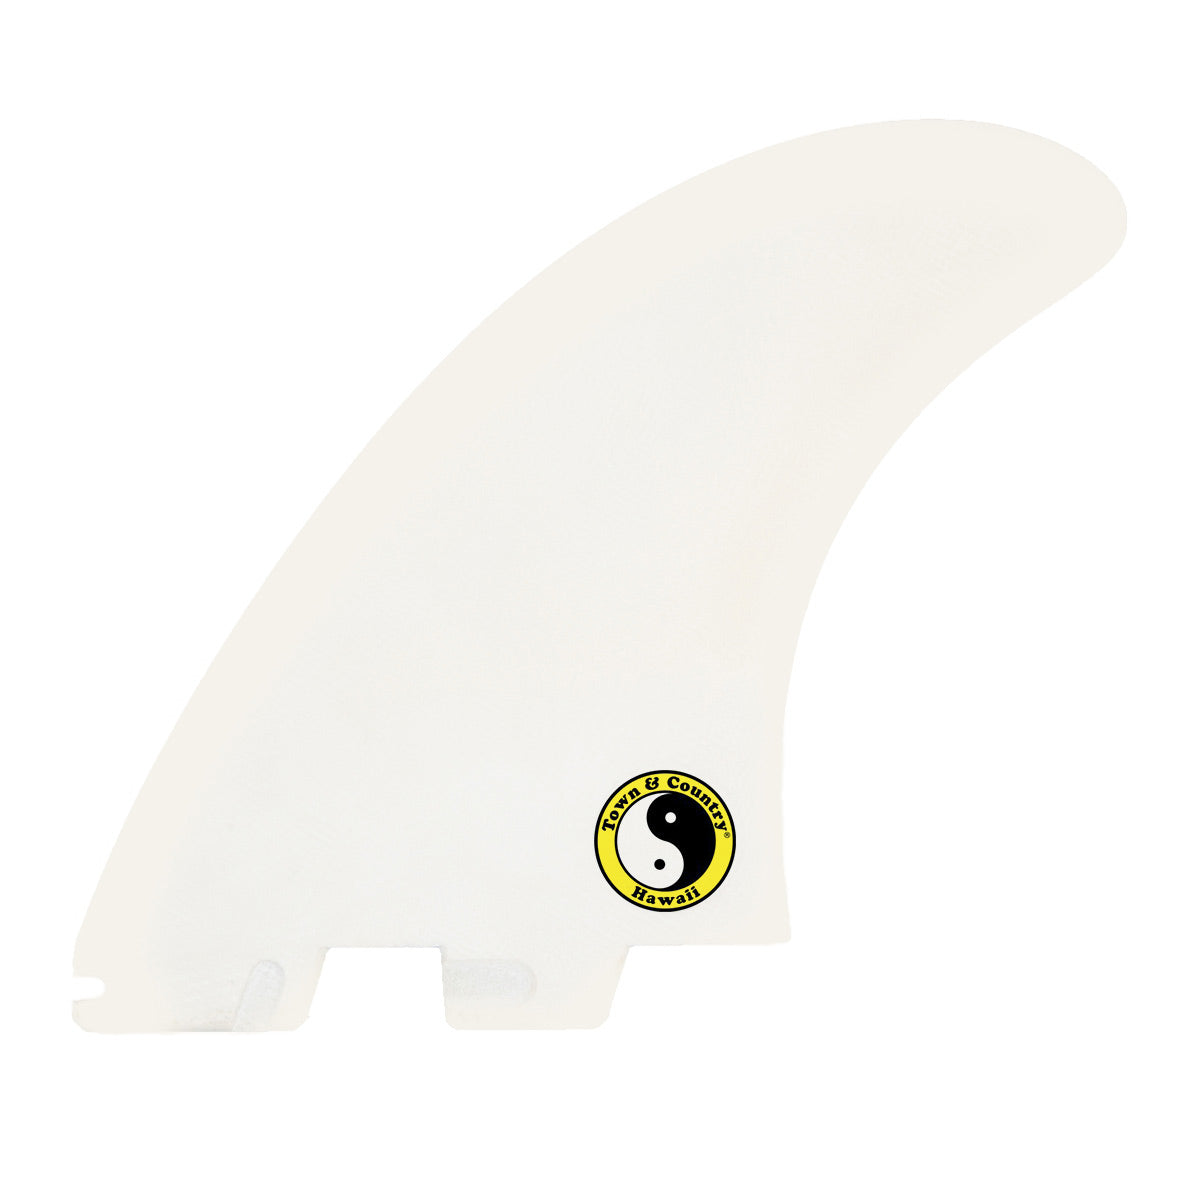 FCS II T&amp;C PG Twin+1 XLarge Yellow Fade Retail Fins